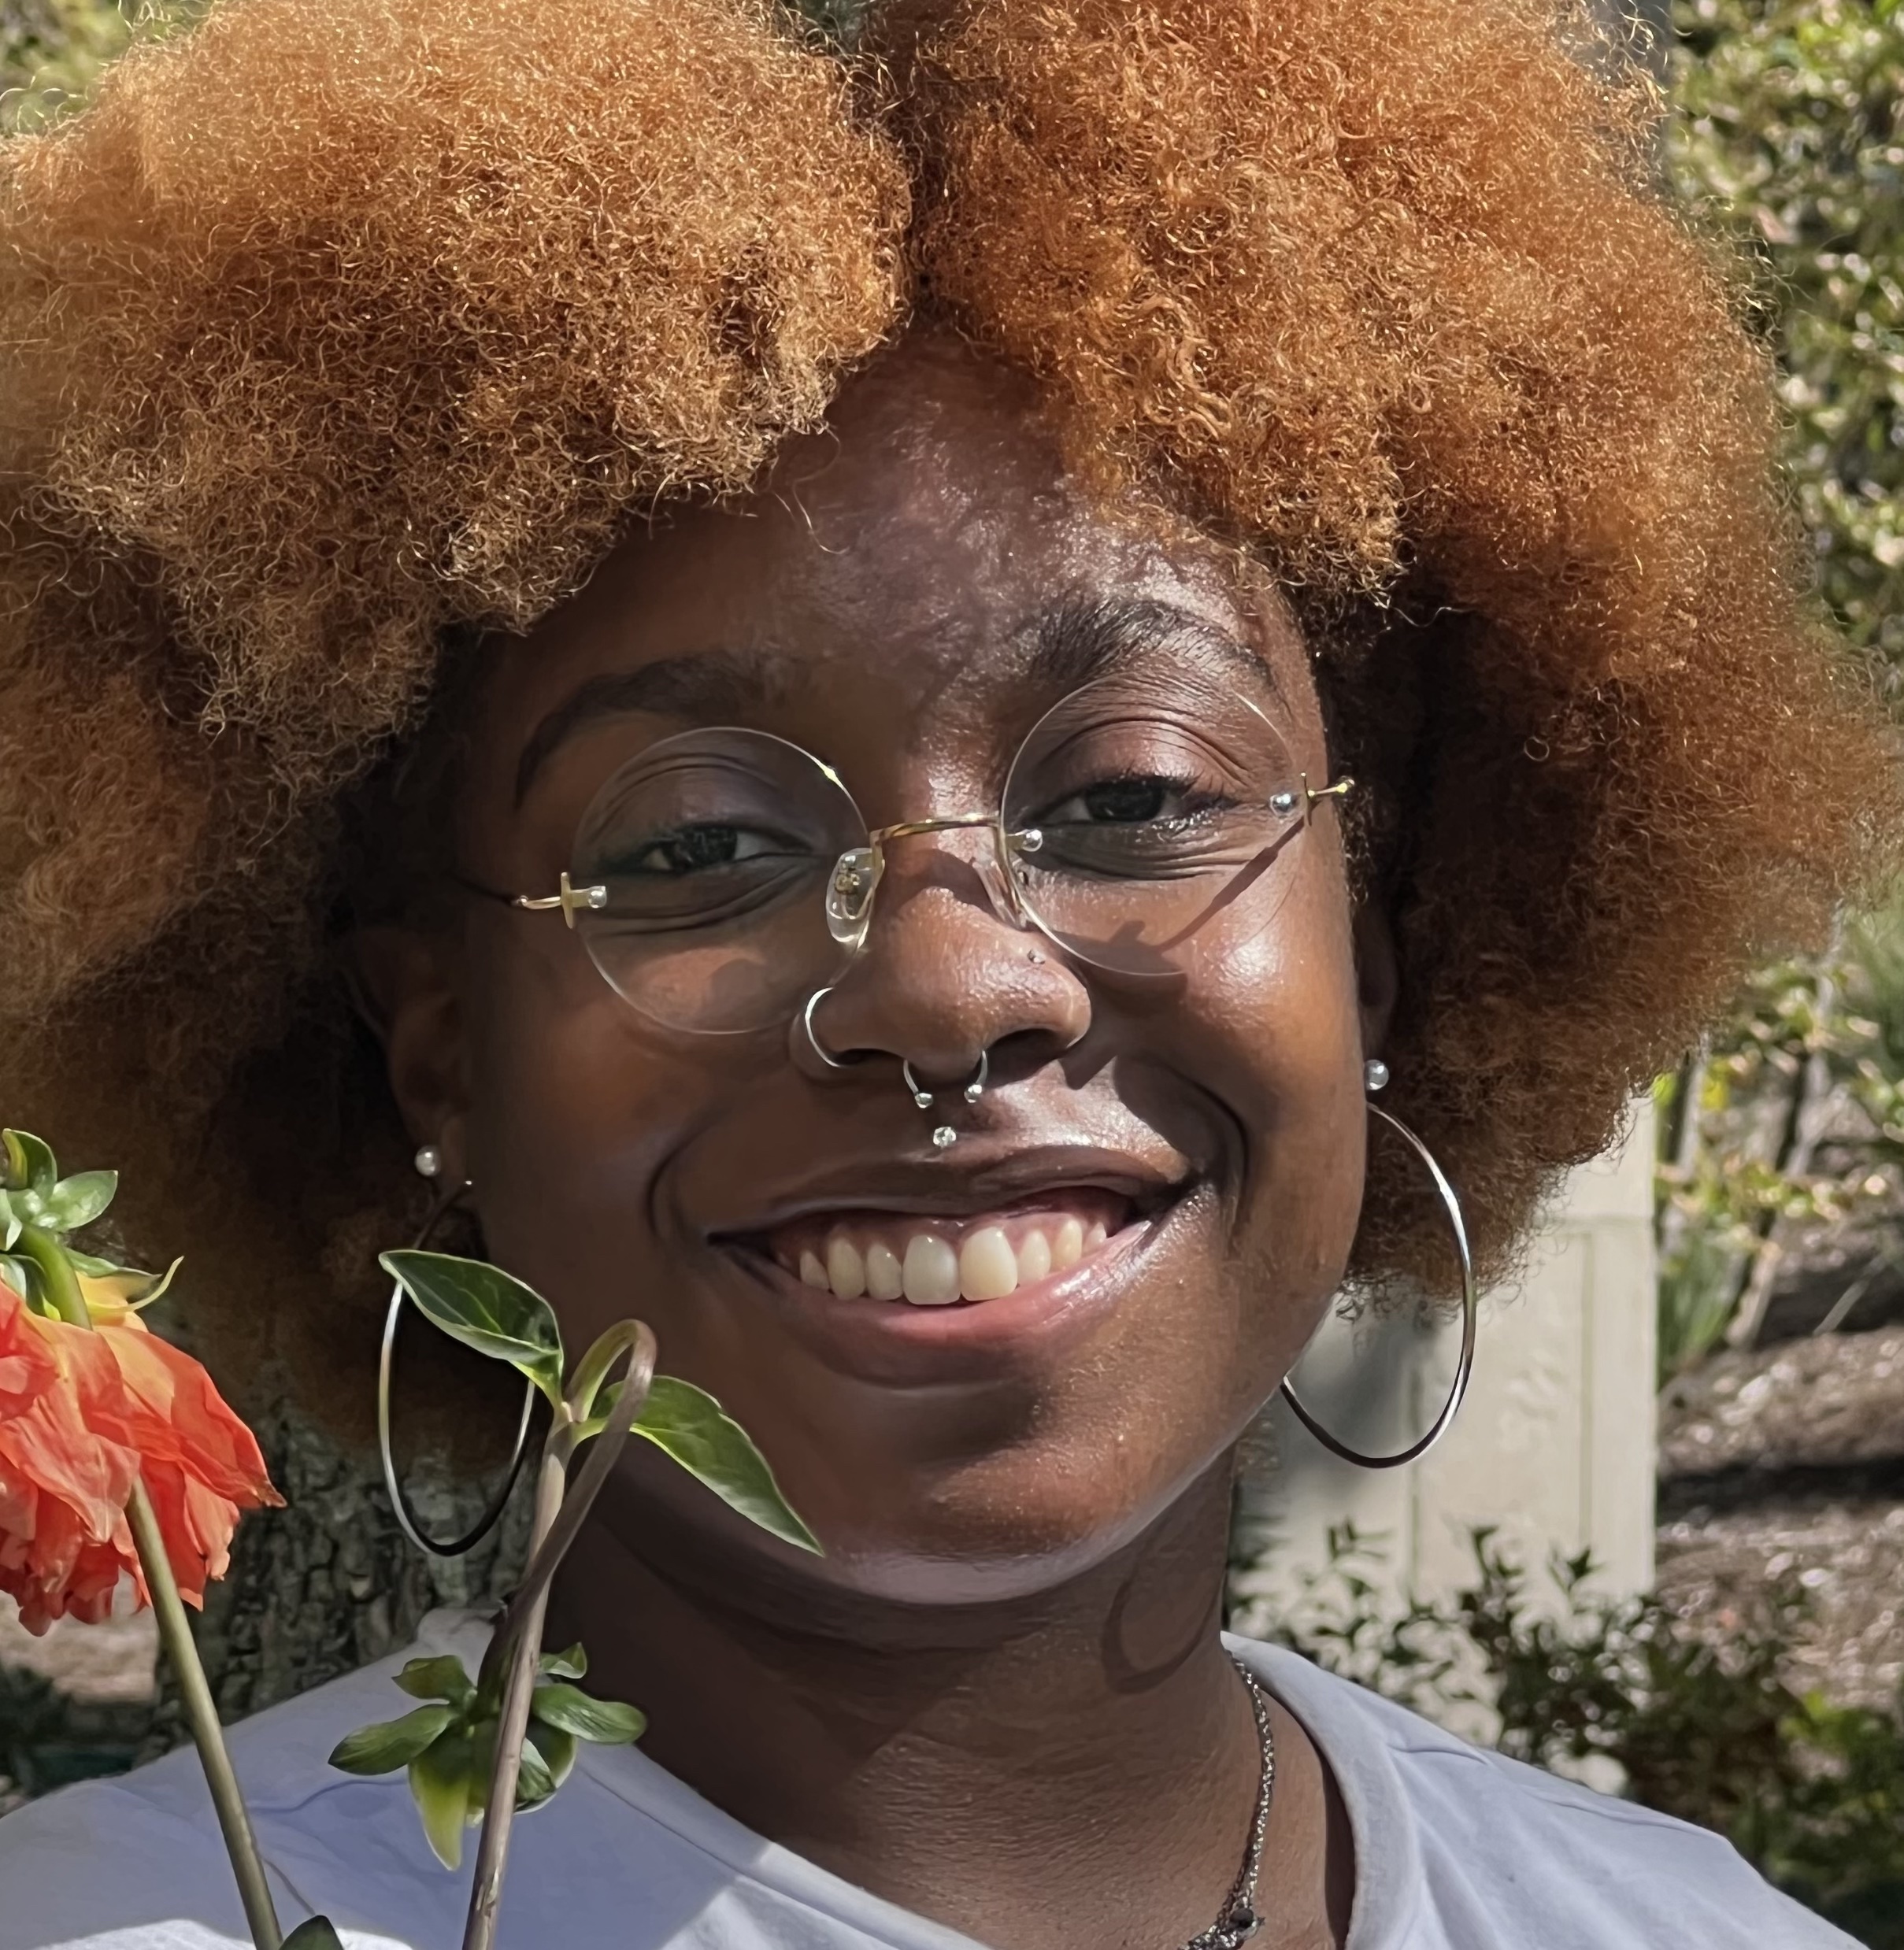 Headshot of a Black non-binary person with glasses and piercings standing behind a flower.